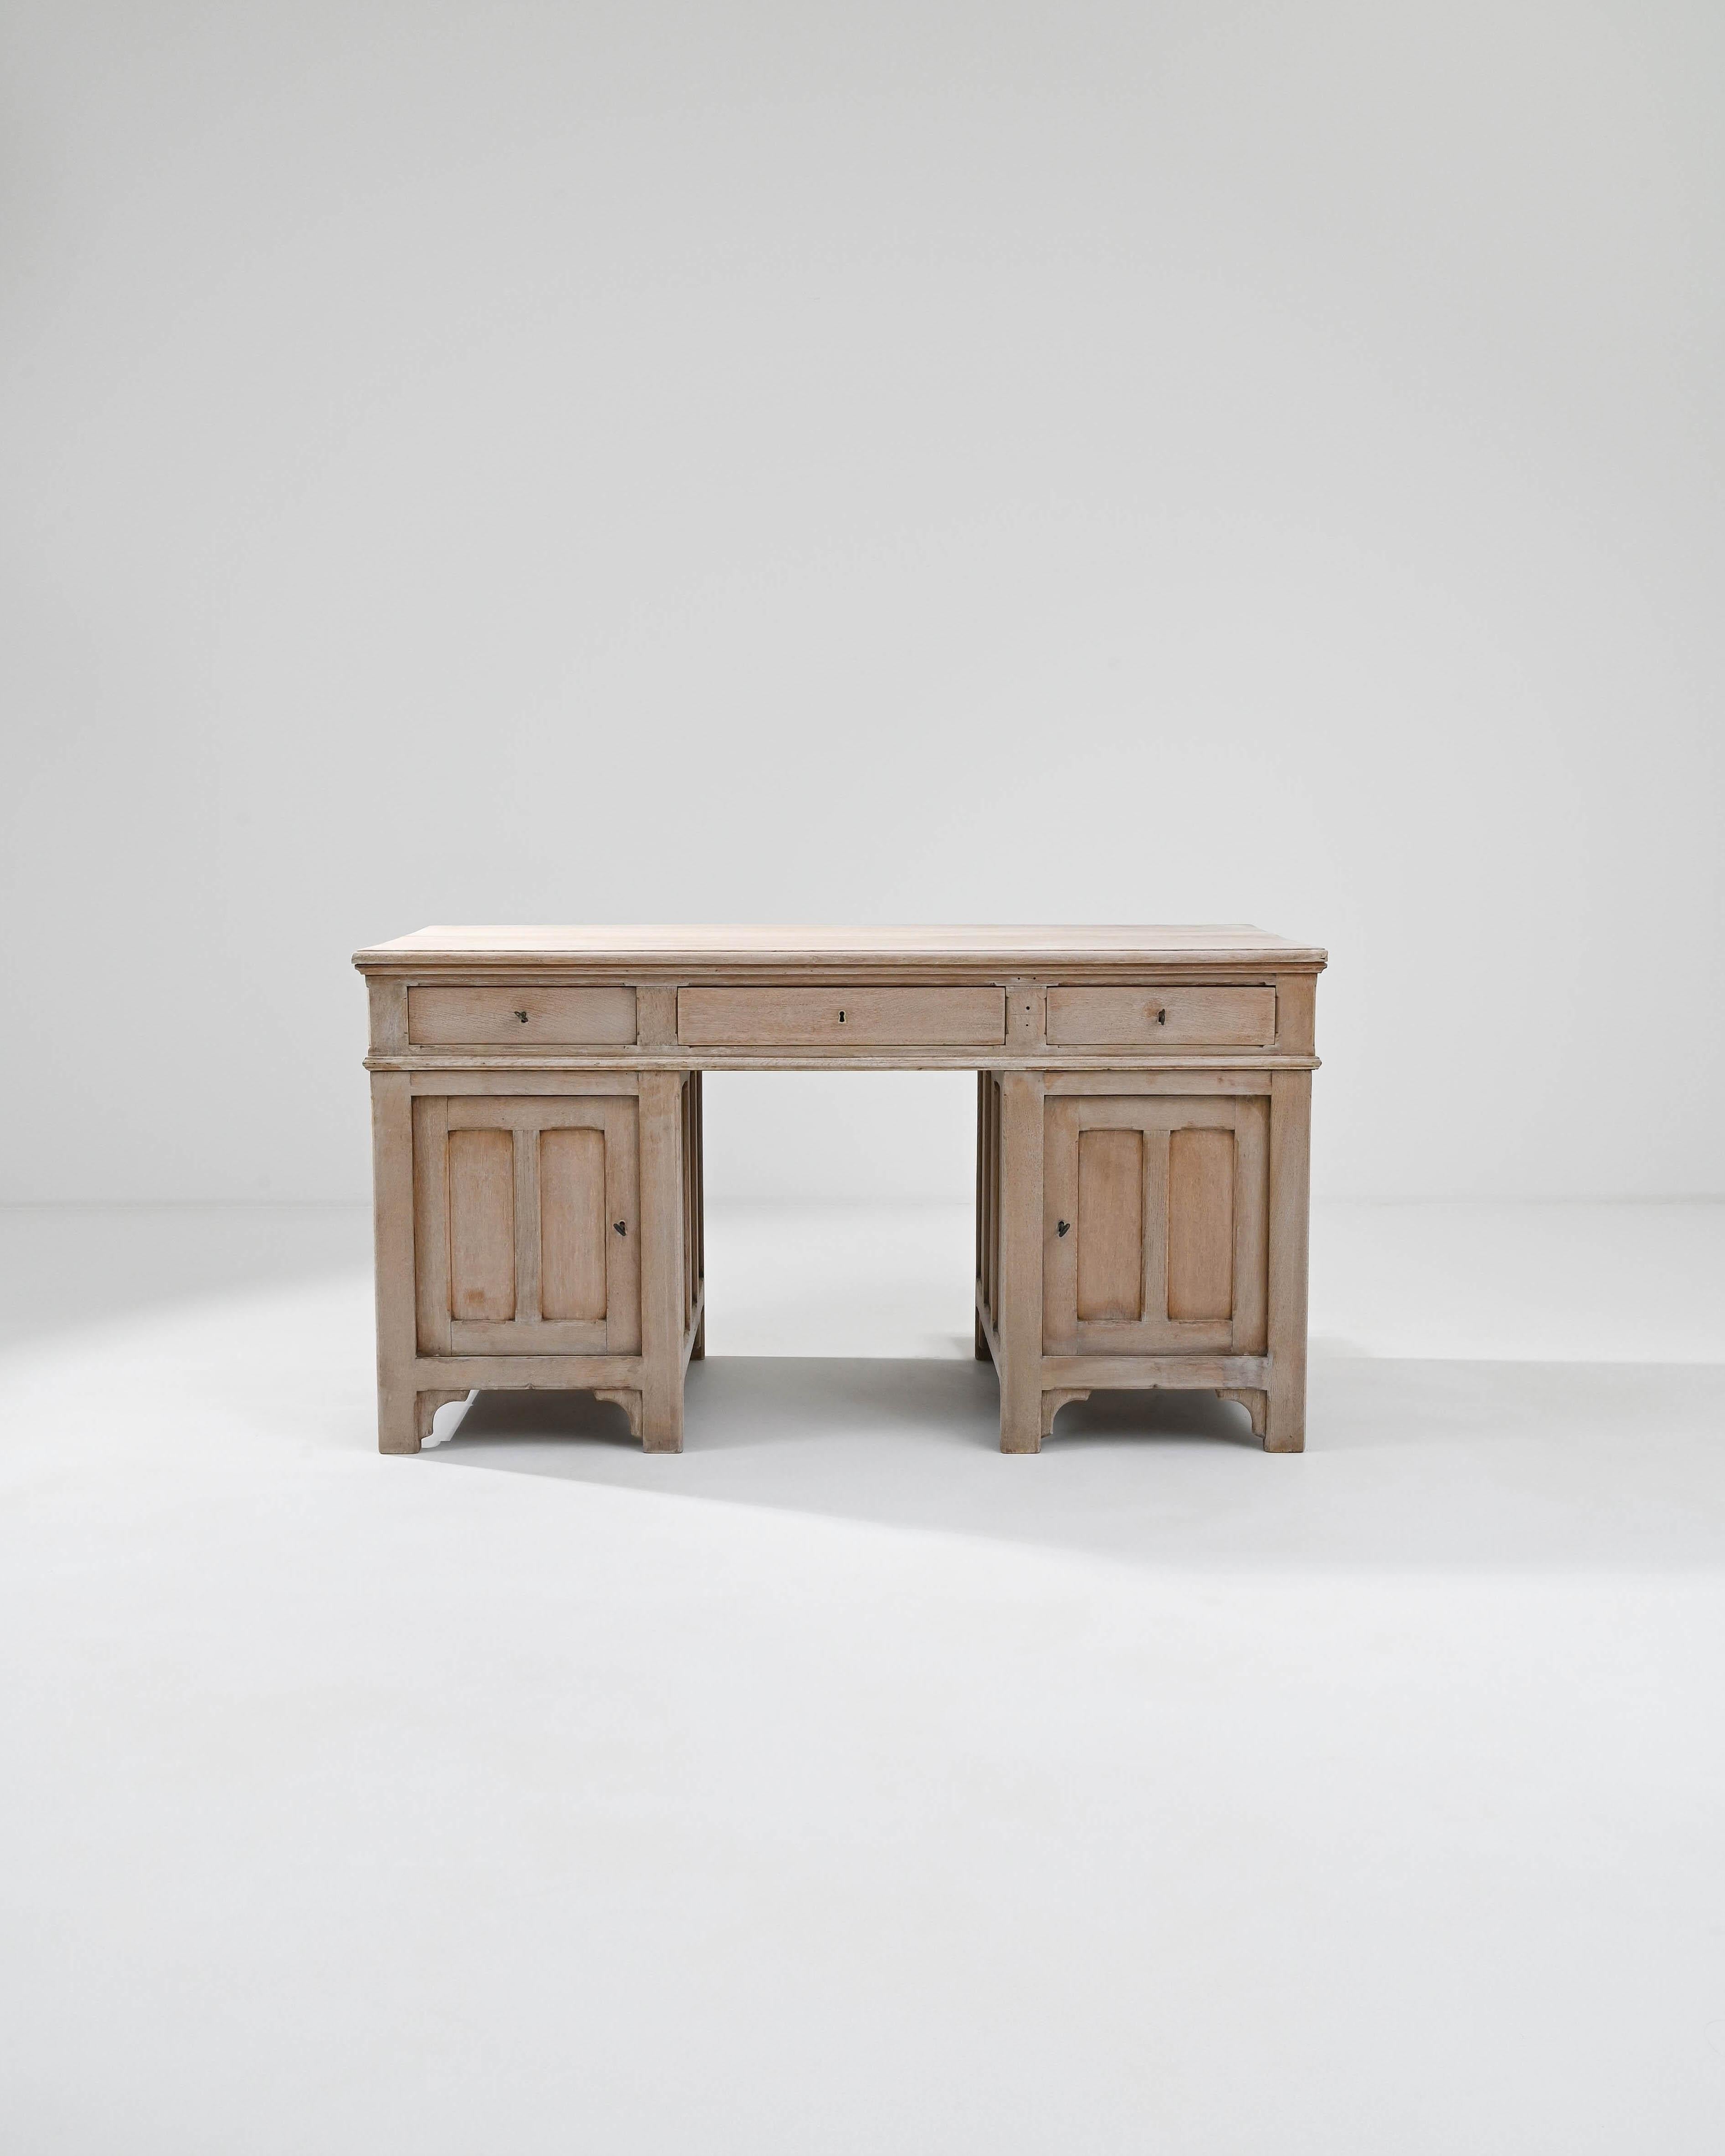 A wooden desk made in Belgium, circa 1900. This ‘kneehole’ type desk, a style first made in England at the 18th century, has two typical flanking storage compartments that form a distinctive nook; allowing a seat to be pulled up to the writing